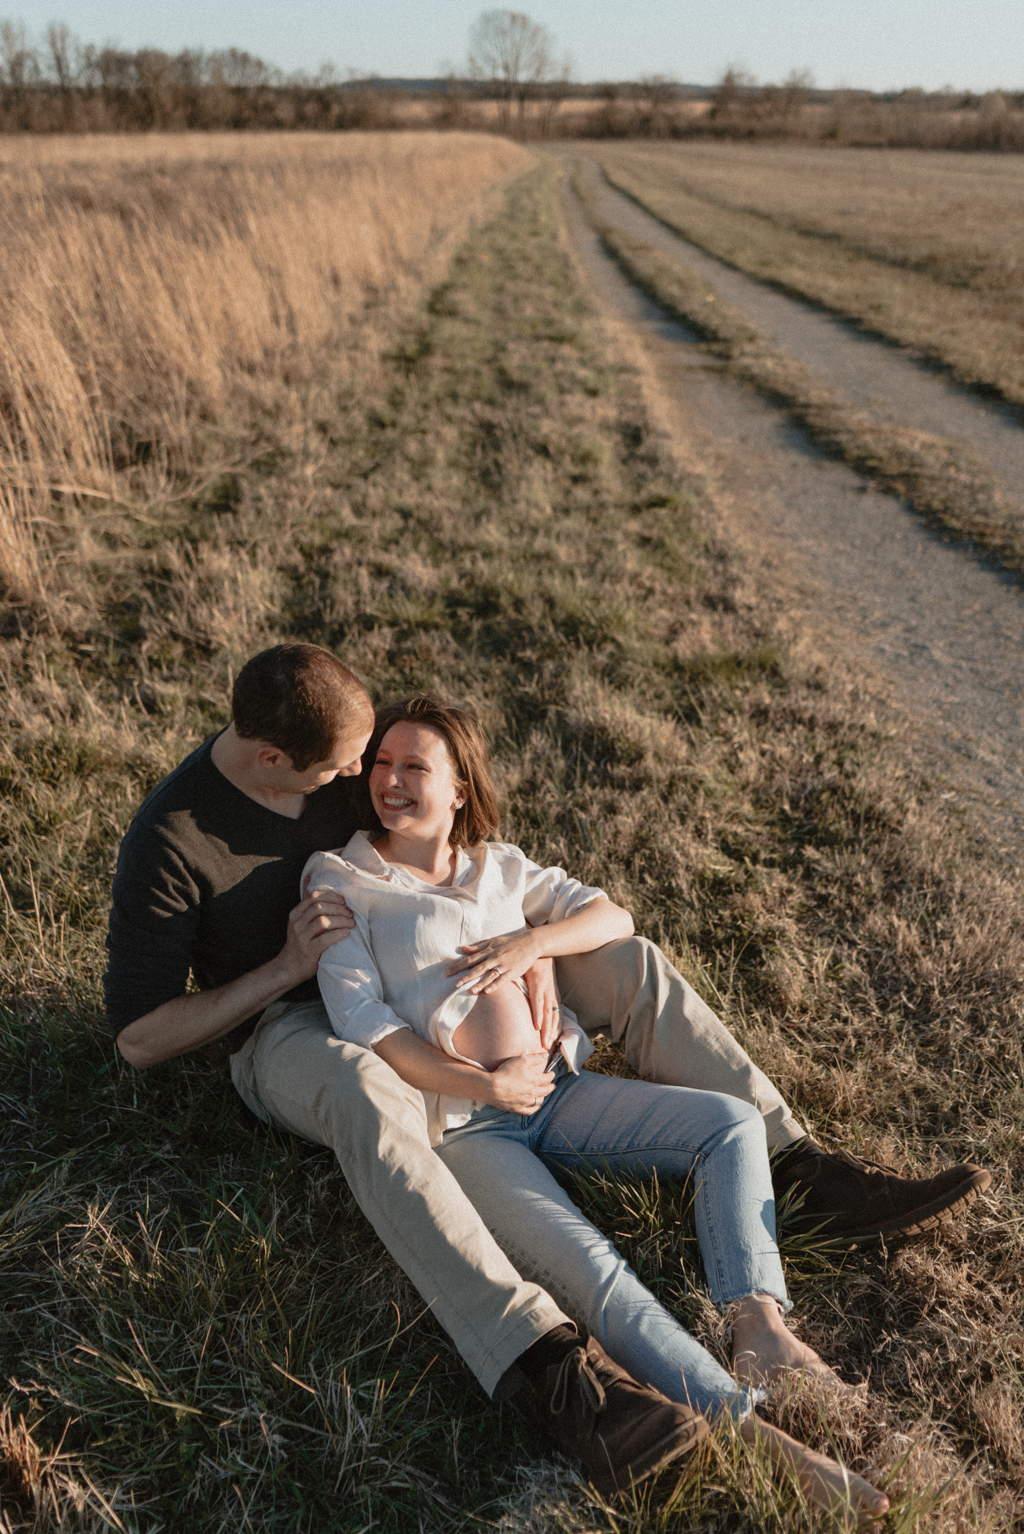 Couple smiling in field while rubbing pregnant belly